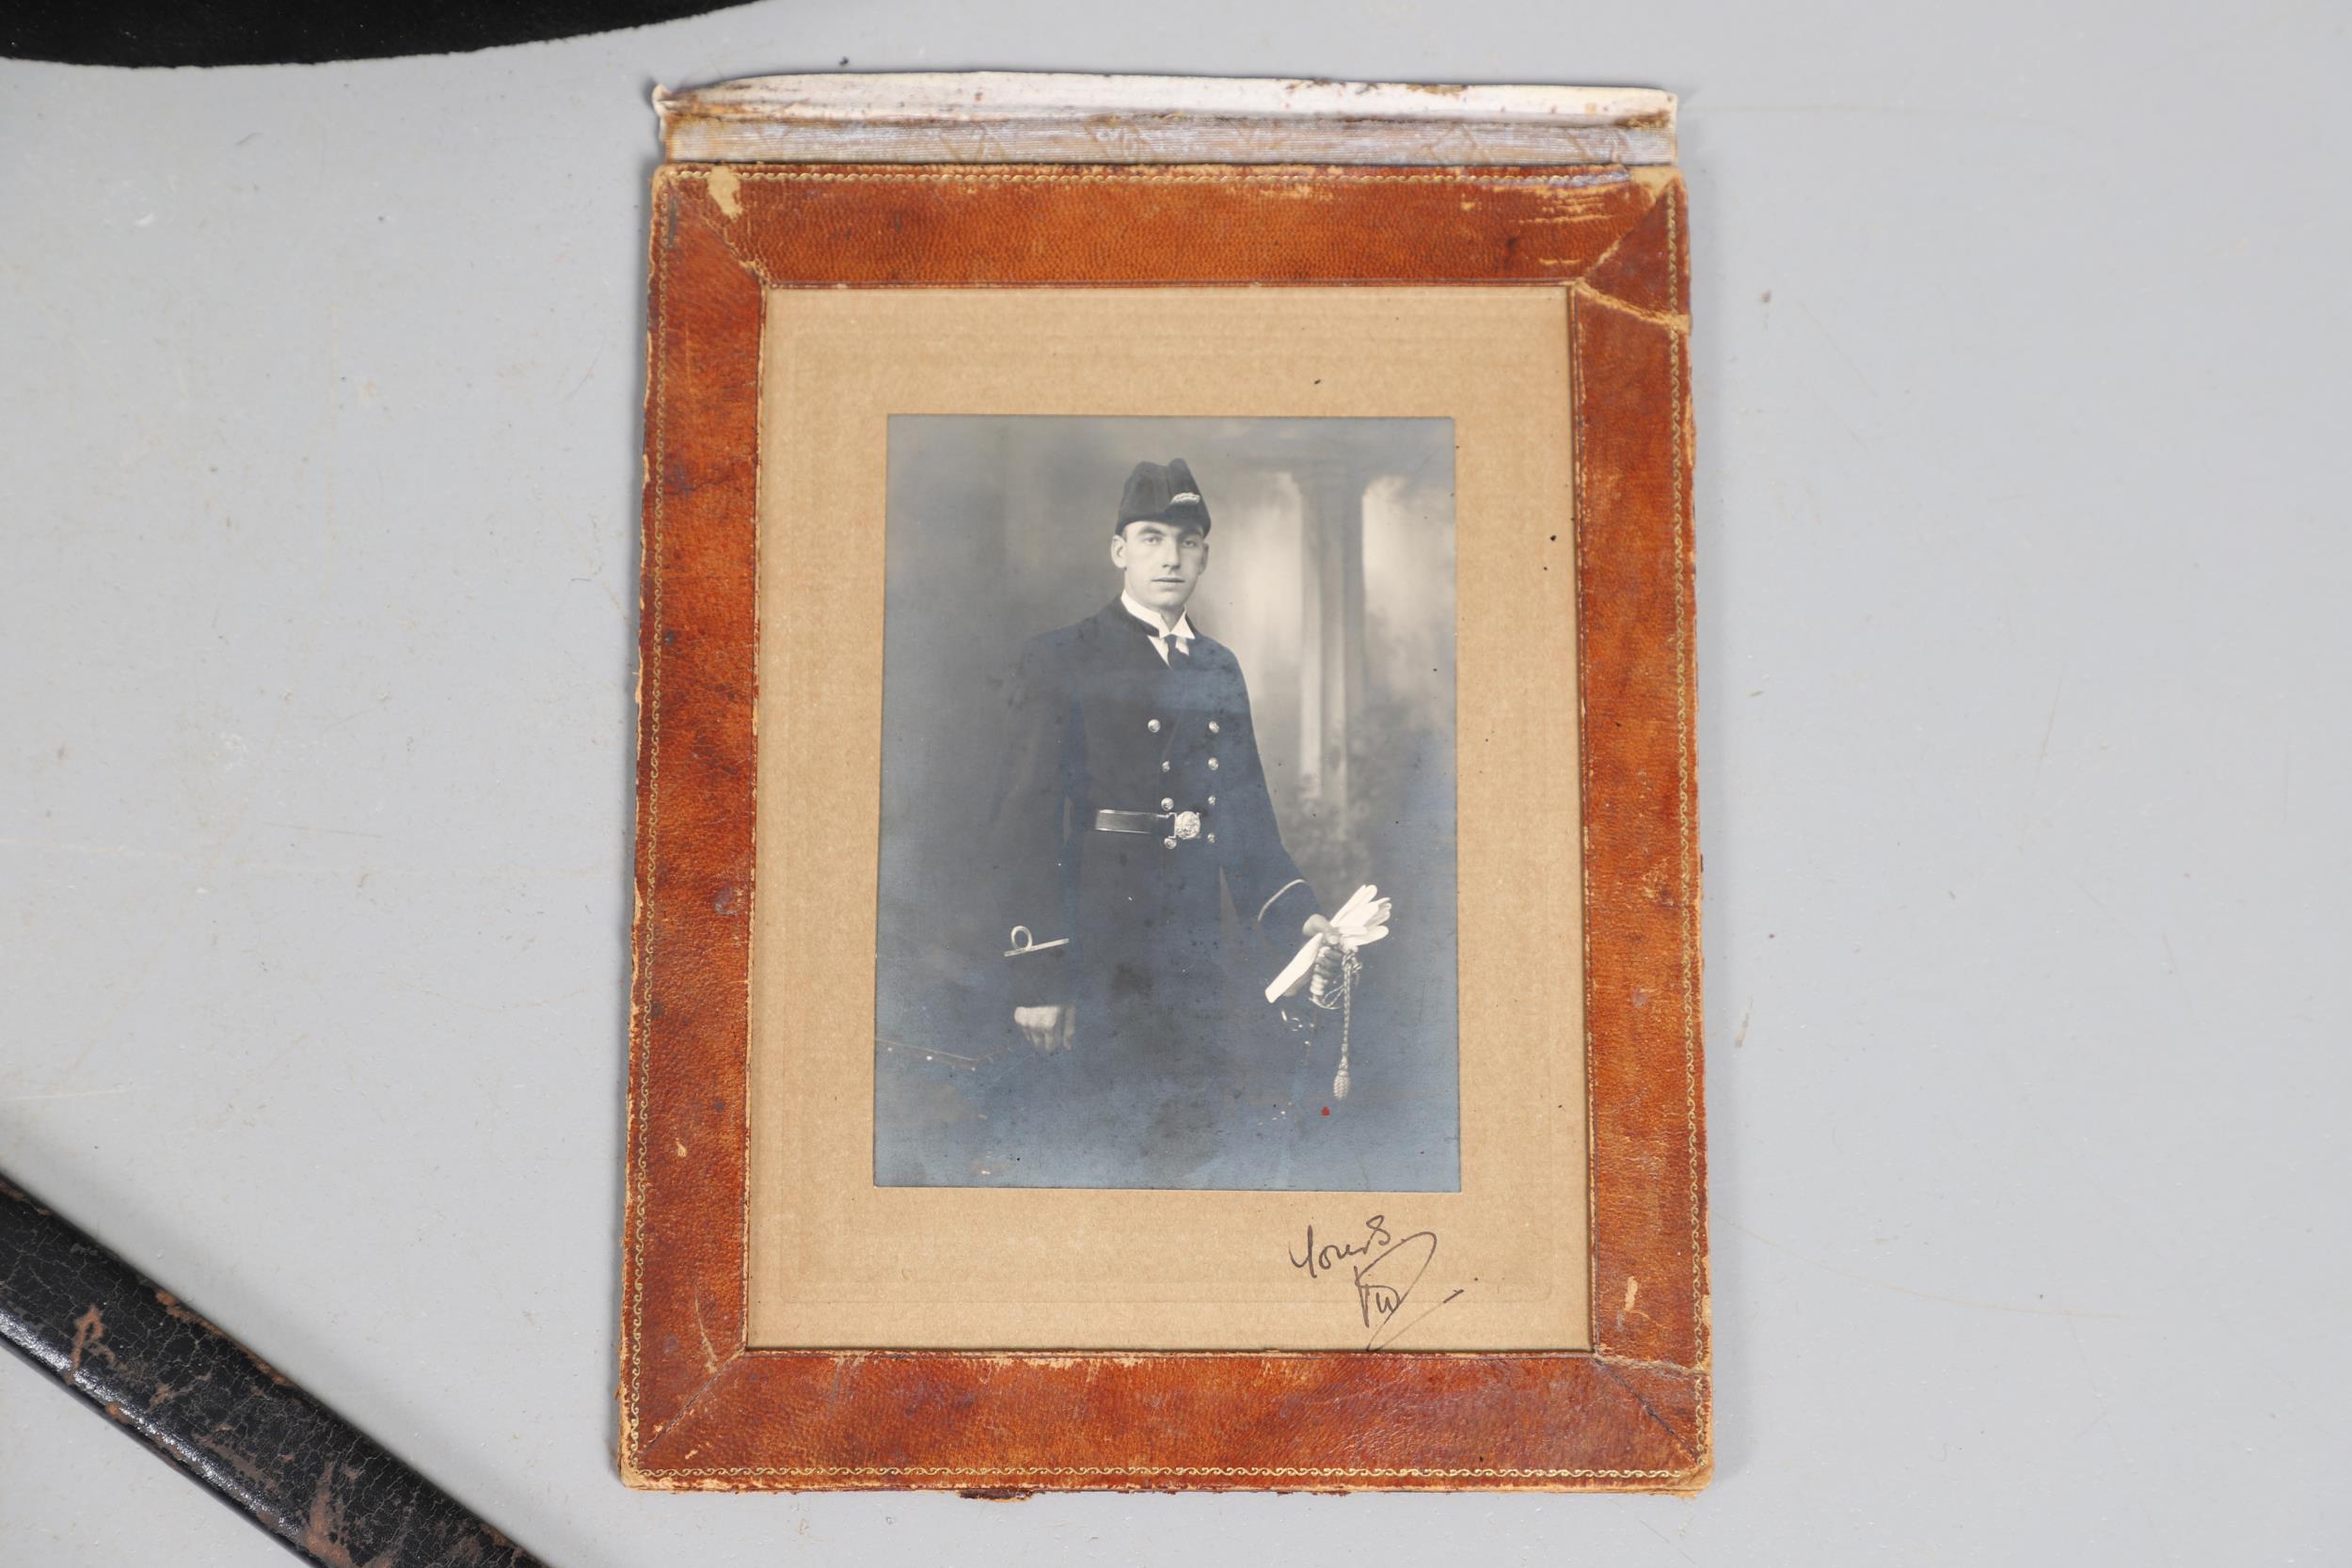 A GEORGE V NAVAL OFFICERS SWORD, HAT, PHOTOGRAPH ALBUM AND OTHER ITEMS THE PROPERTY OF VIVIAN POTTS. - Image 10 of 25